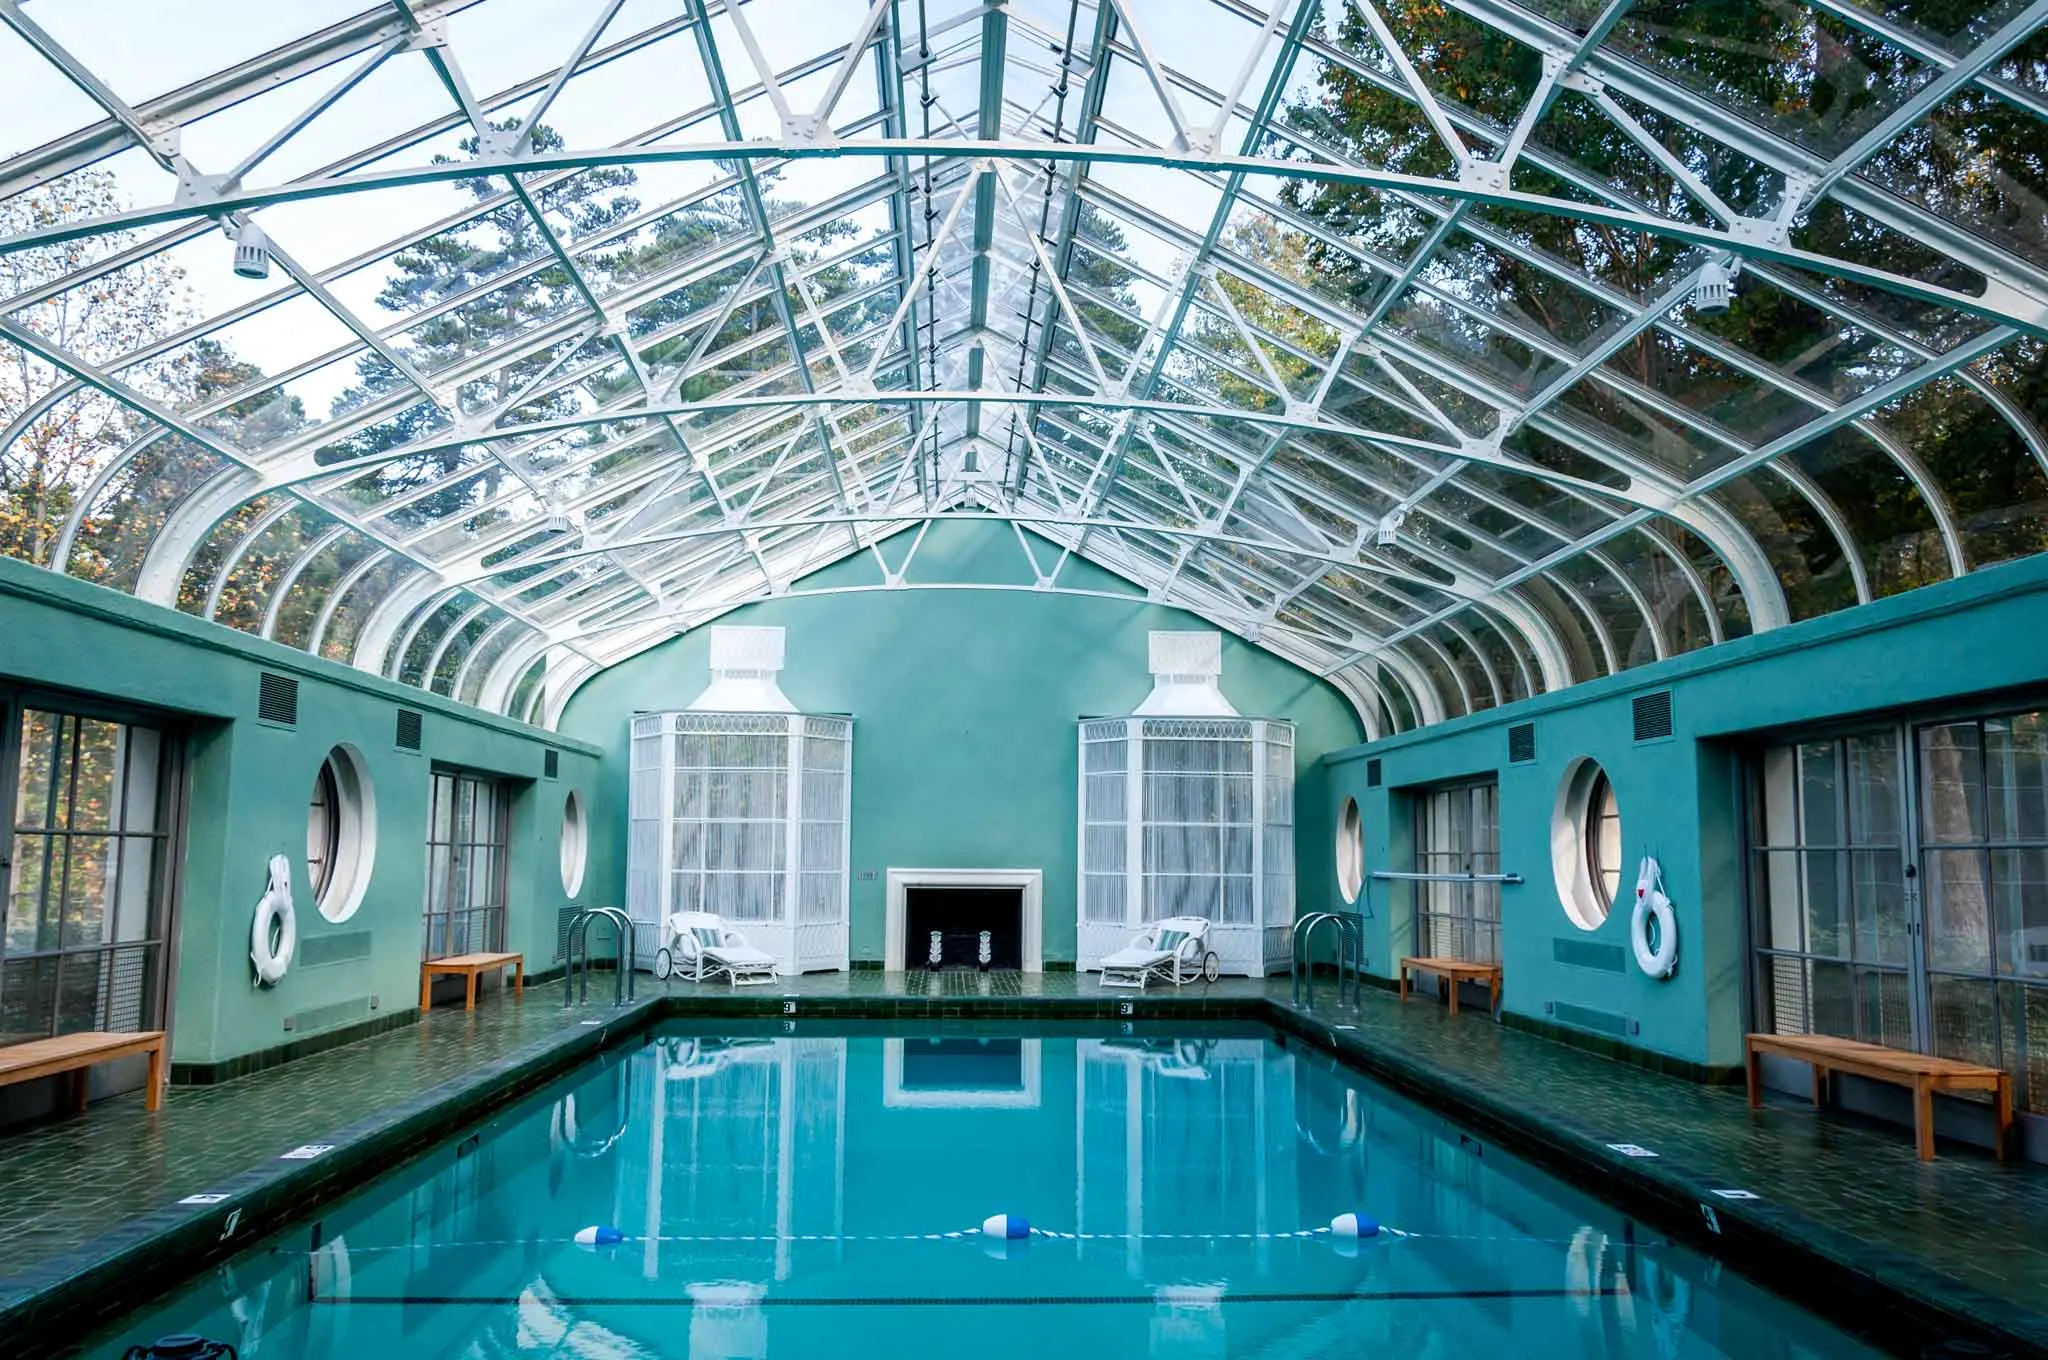 Indoor pool in room with a glass ceiling. 